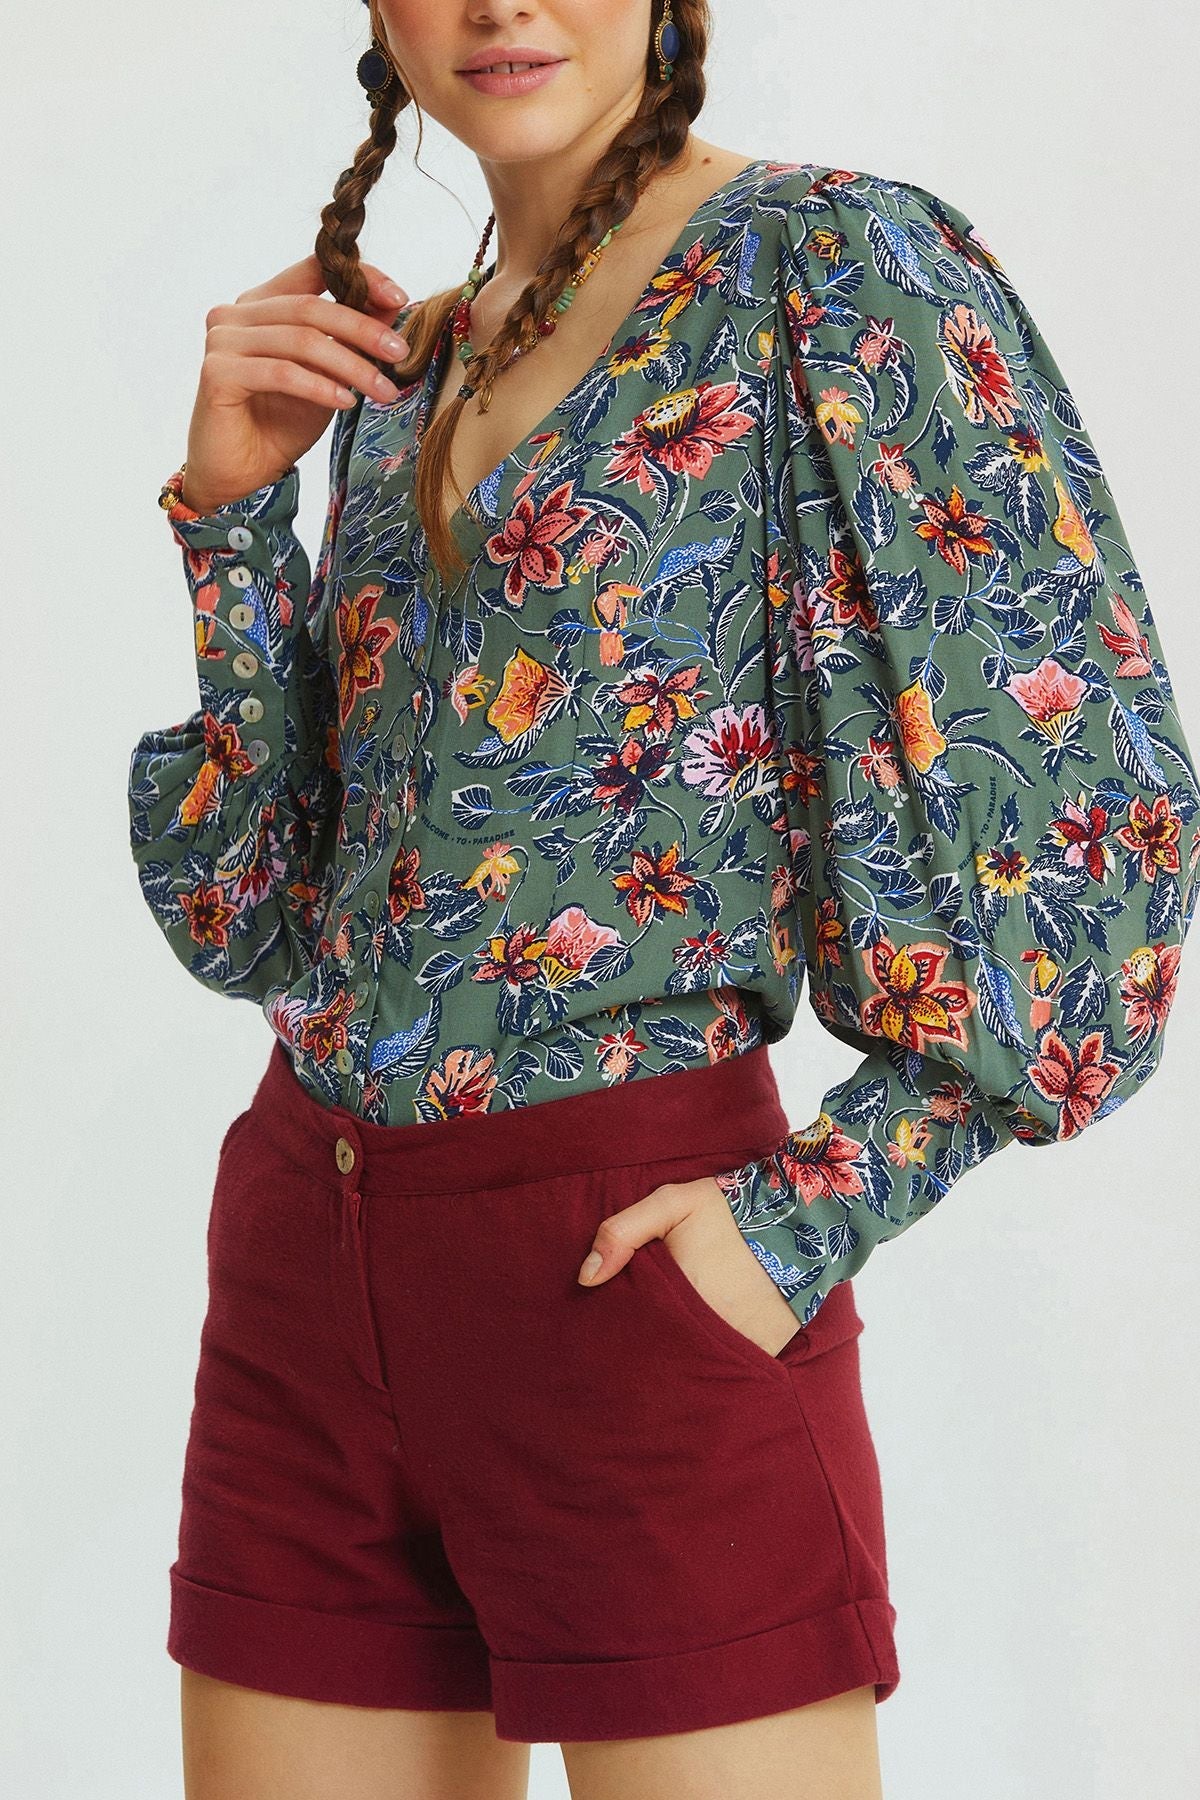 Sleeve Detailed Floral Retro Women's Shirt Gray